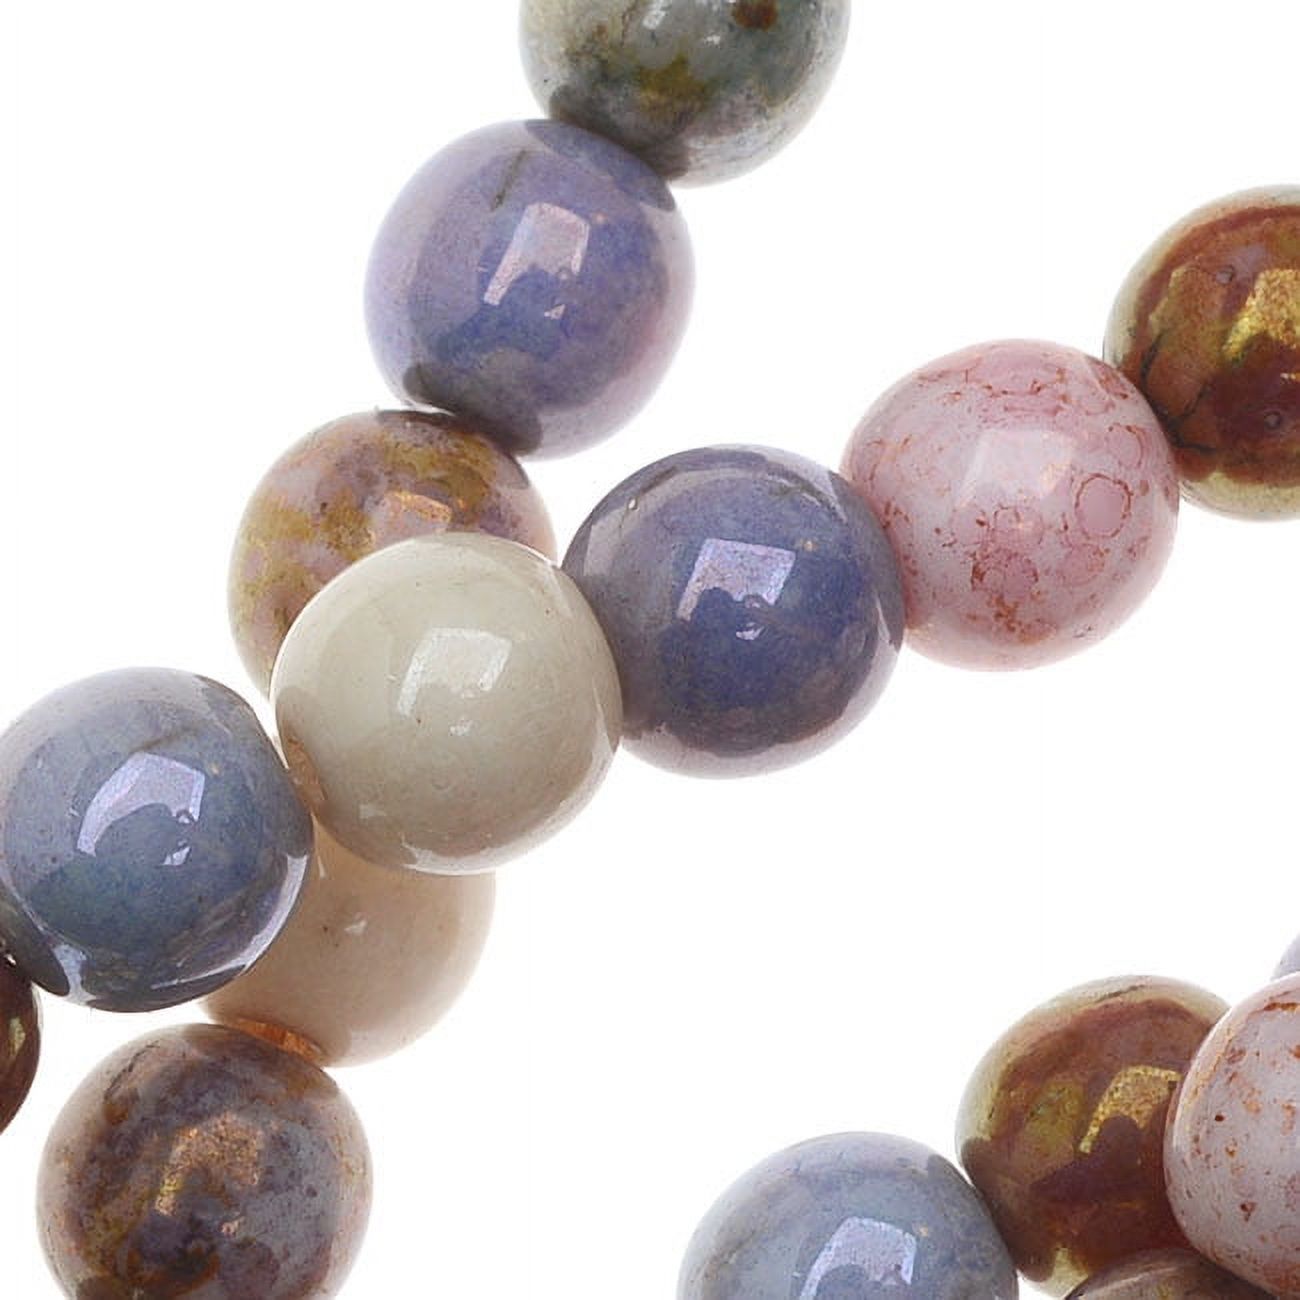 Czech Glass Beads, Round Druks 6mm, 1 Strand, Opaque Luster Mix - image 1 of 2